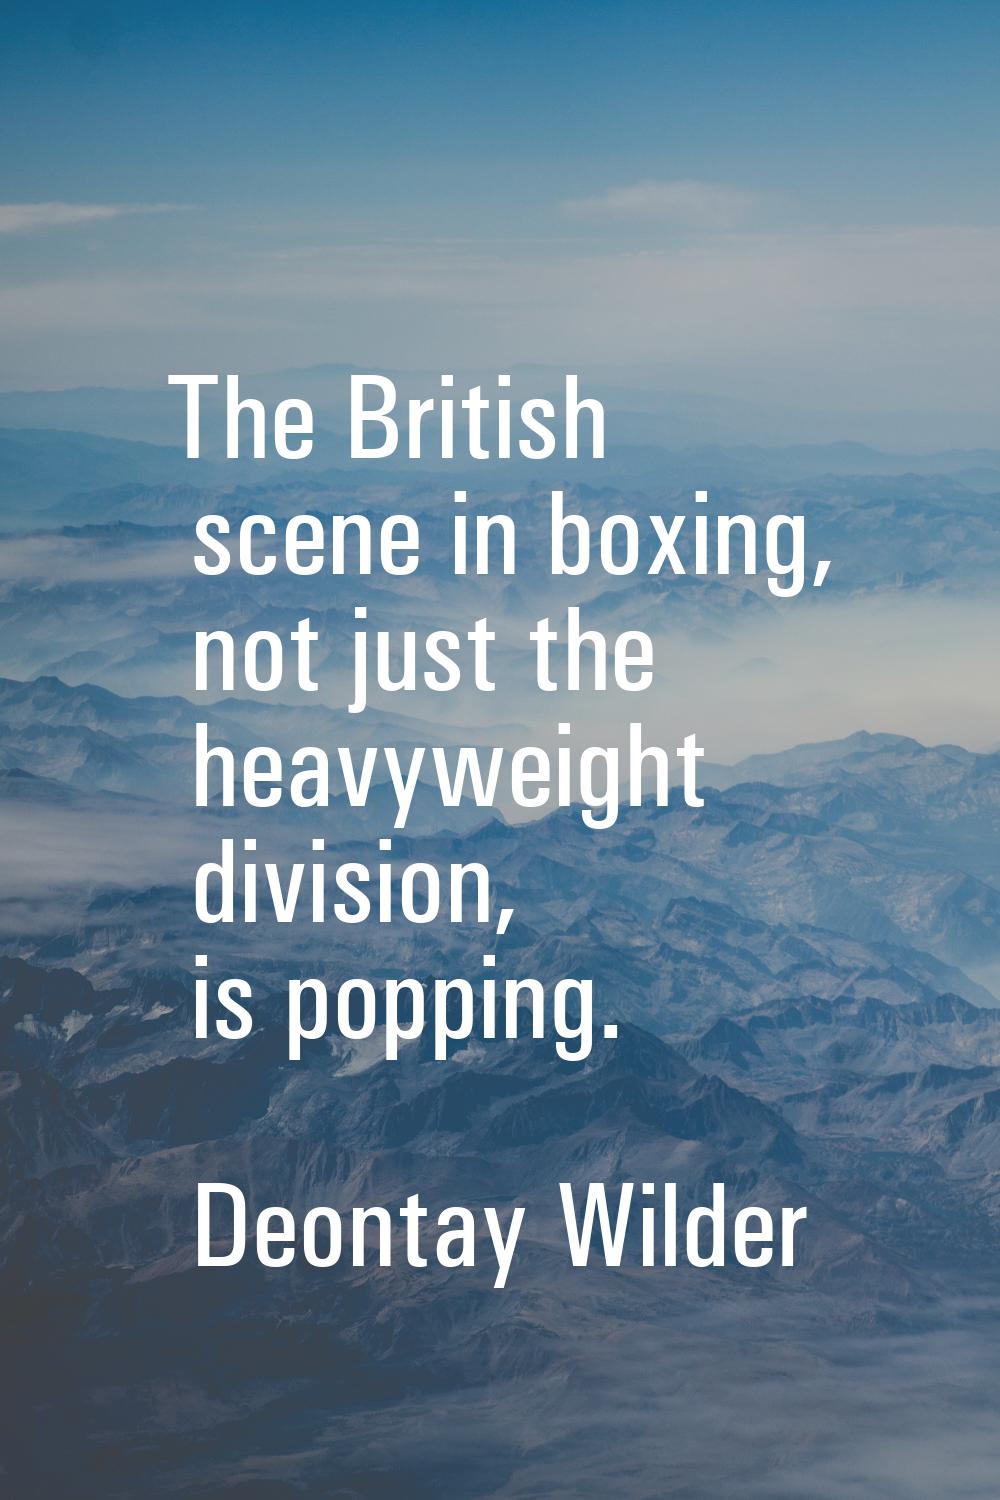 The British scene in boxing, not just the heavyweight division, is popping.